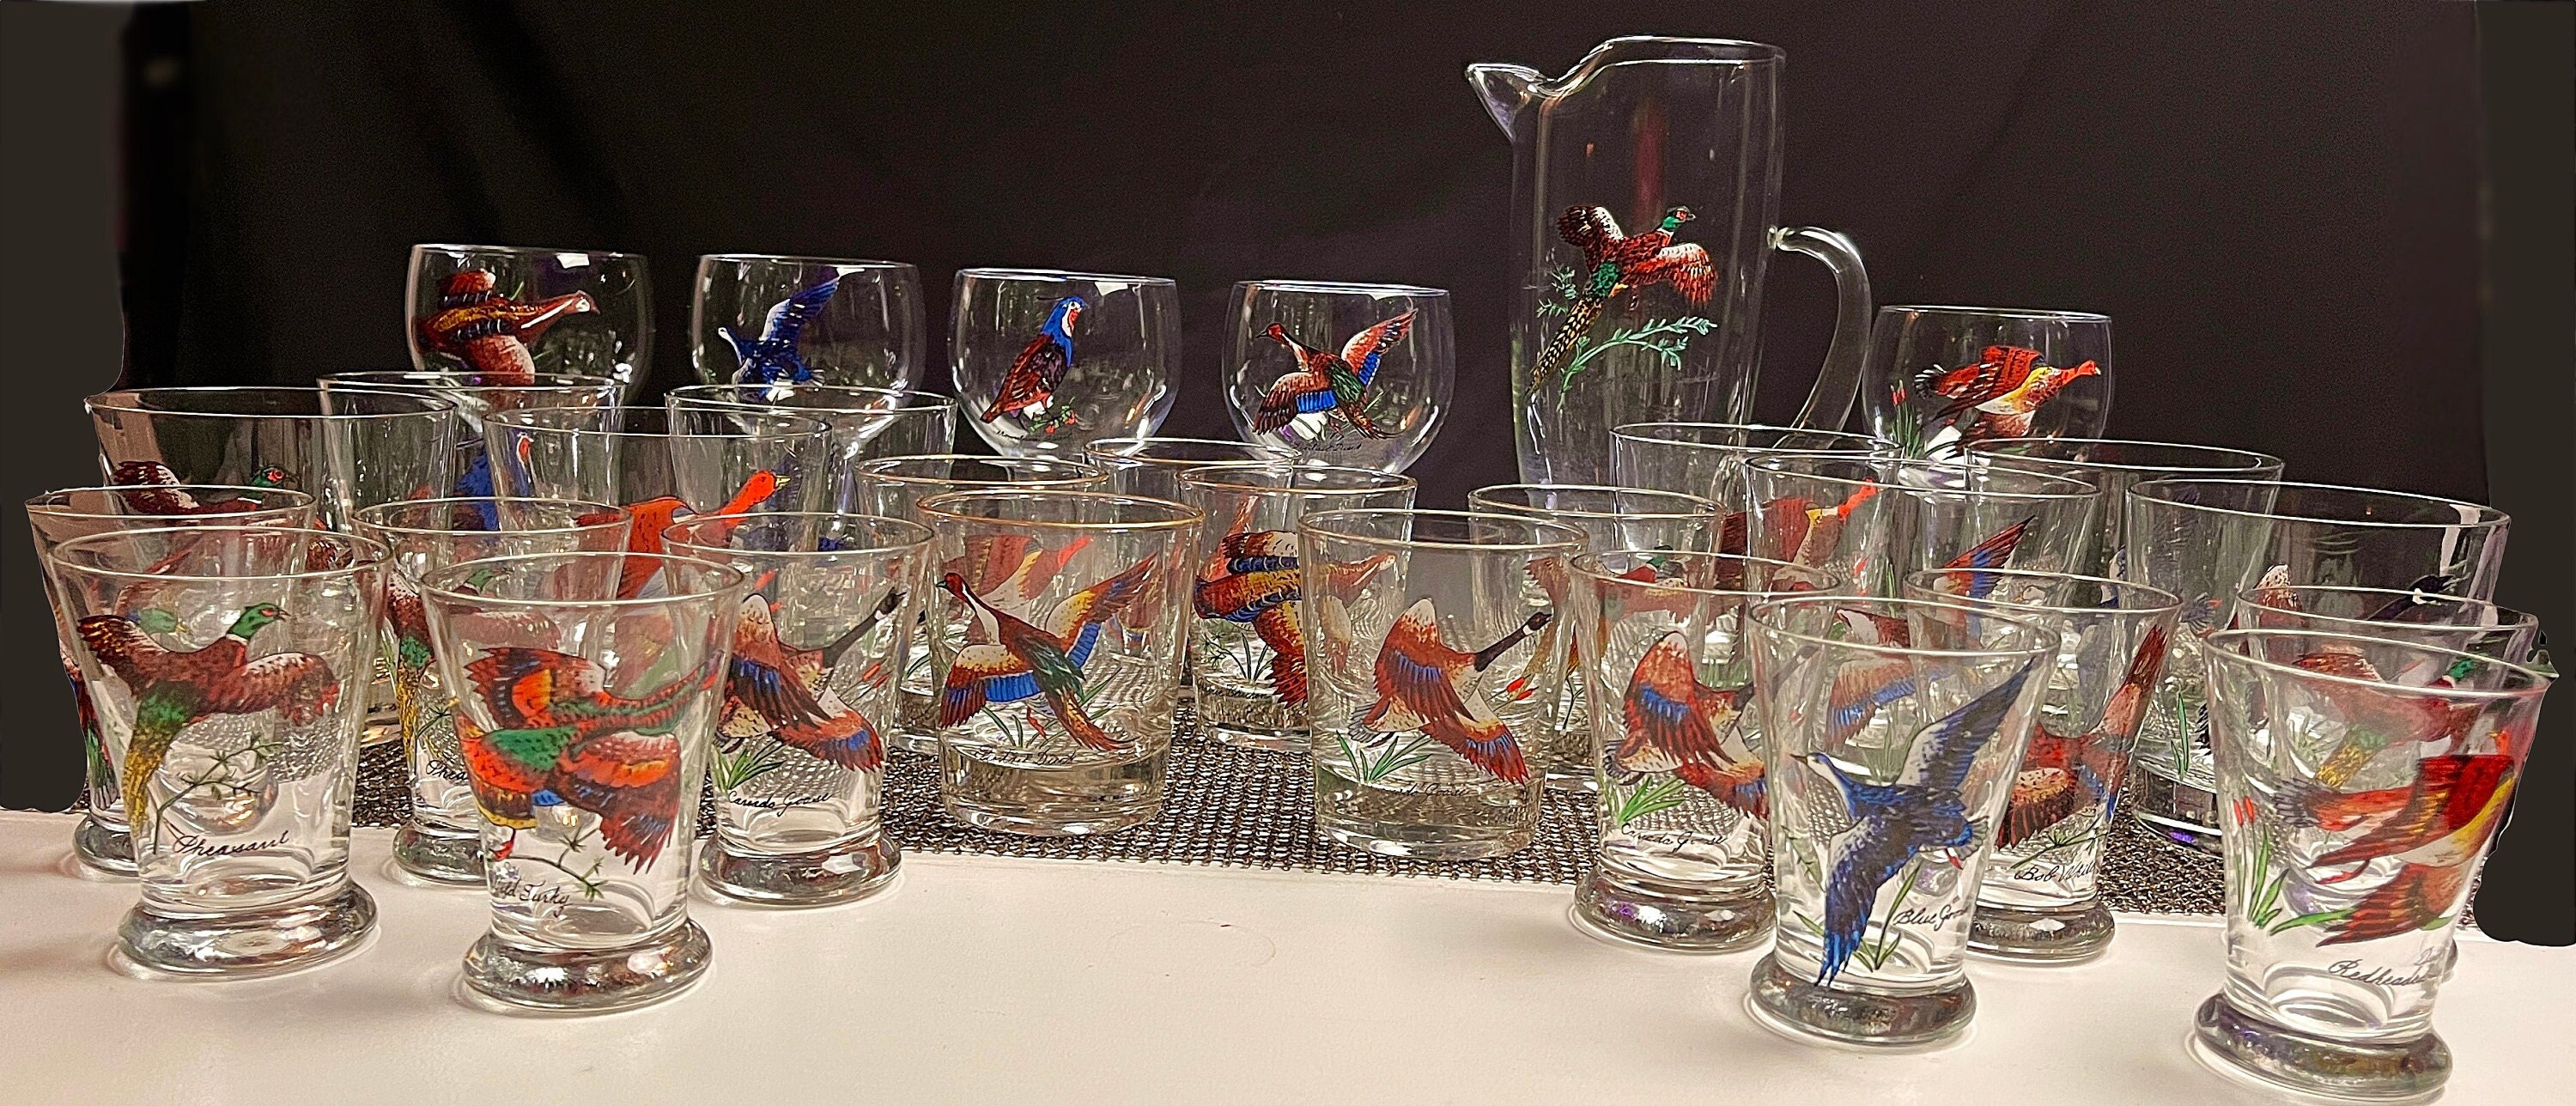 School of Fish Glass Painting - Glass With A Past